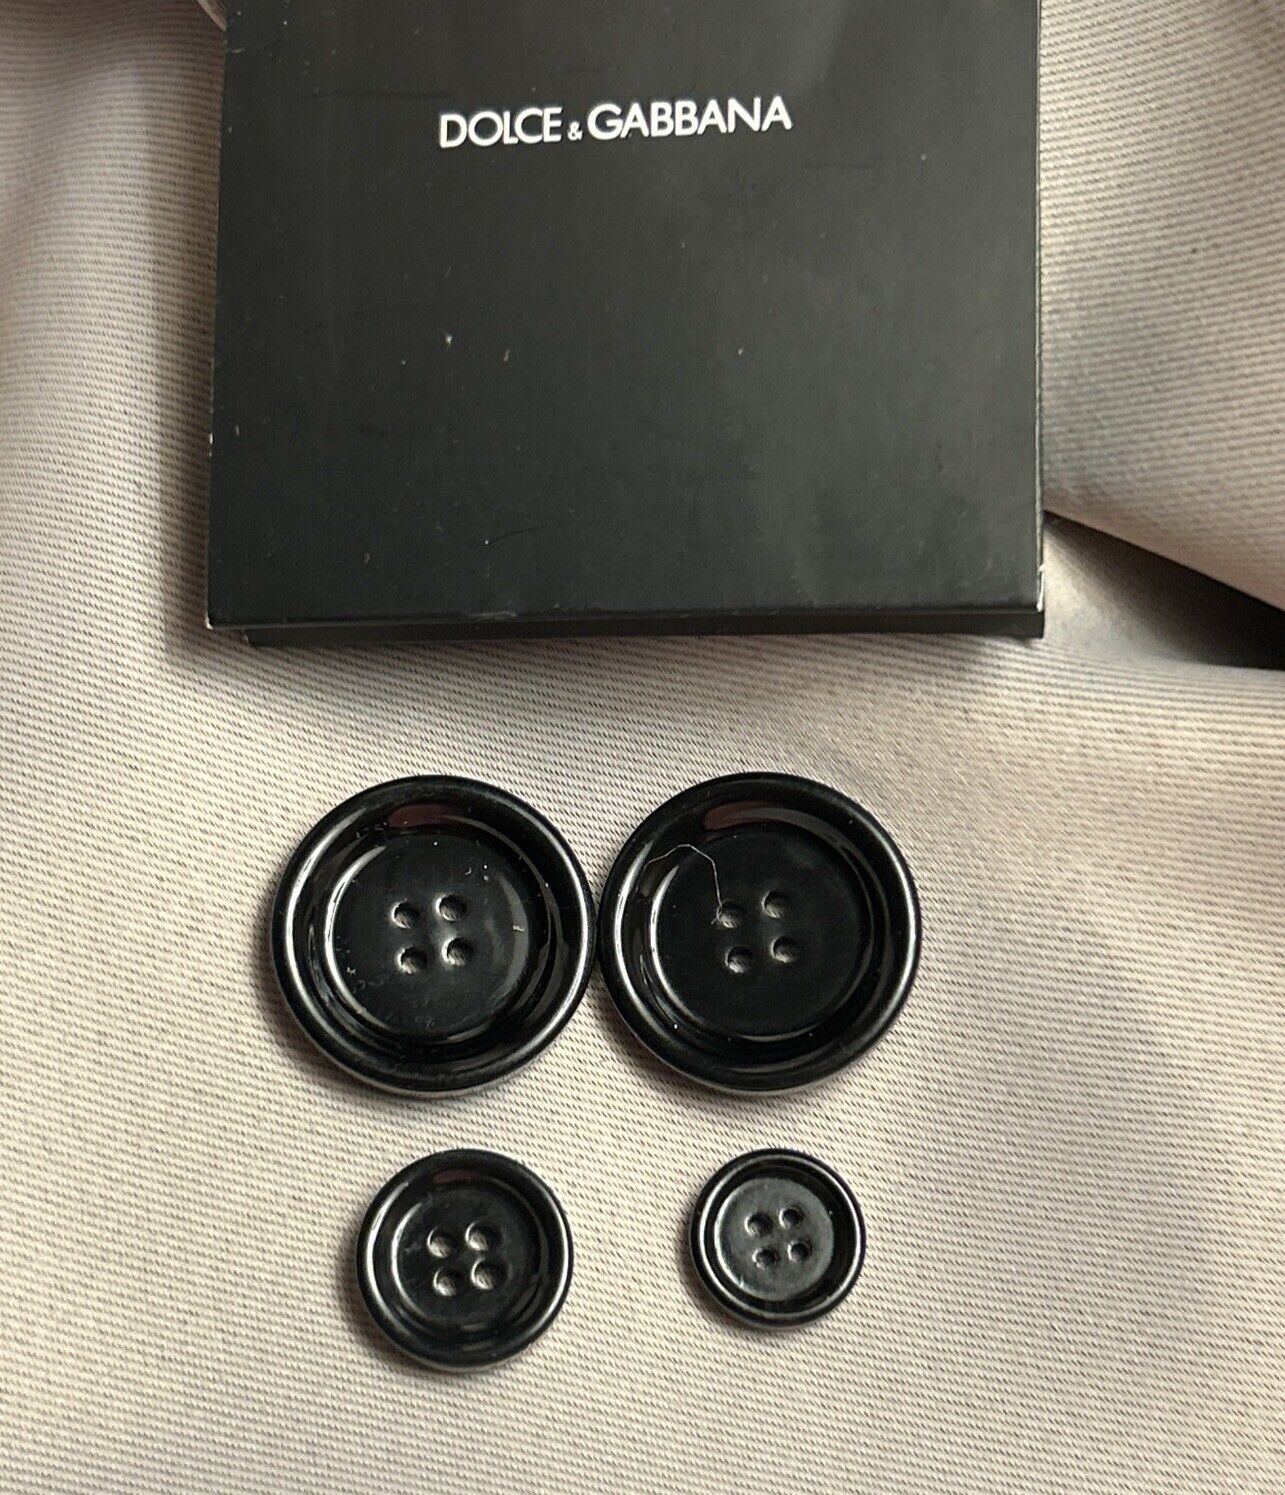 DOLCE & GABBANA Black 4 Buttons Authentic New